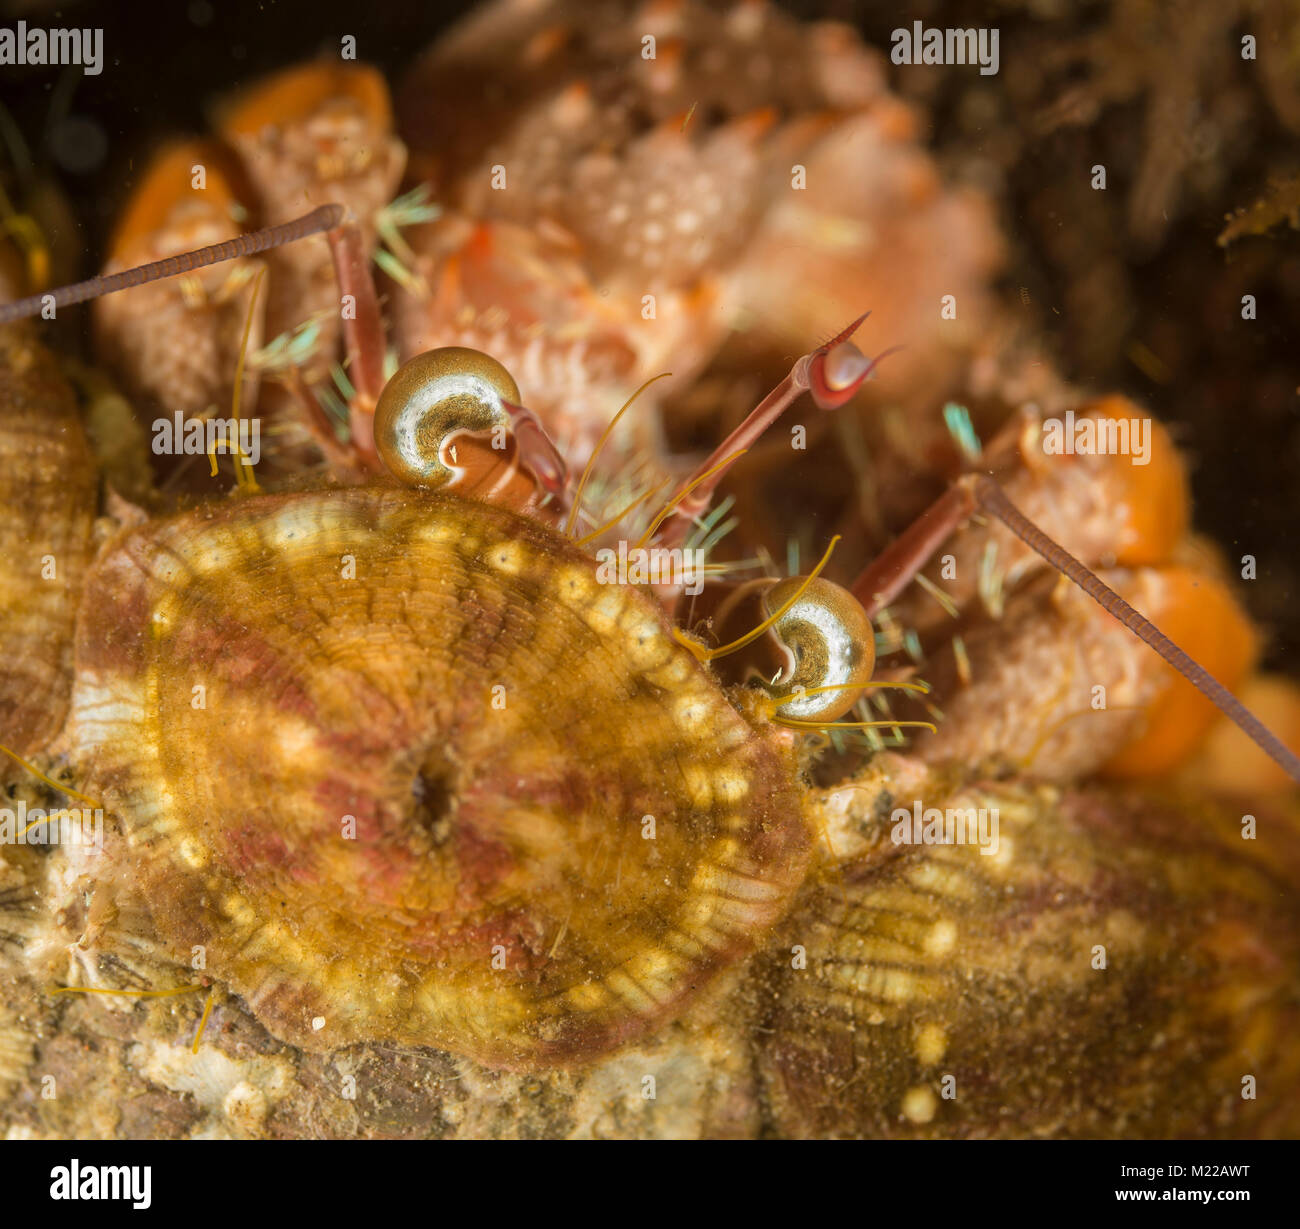 Hermit crab on a coral Stock Photo